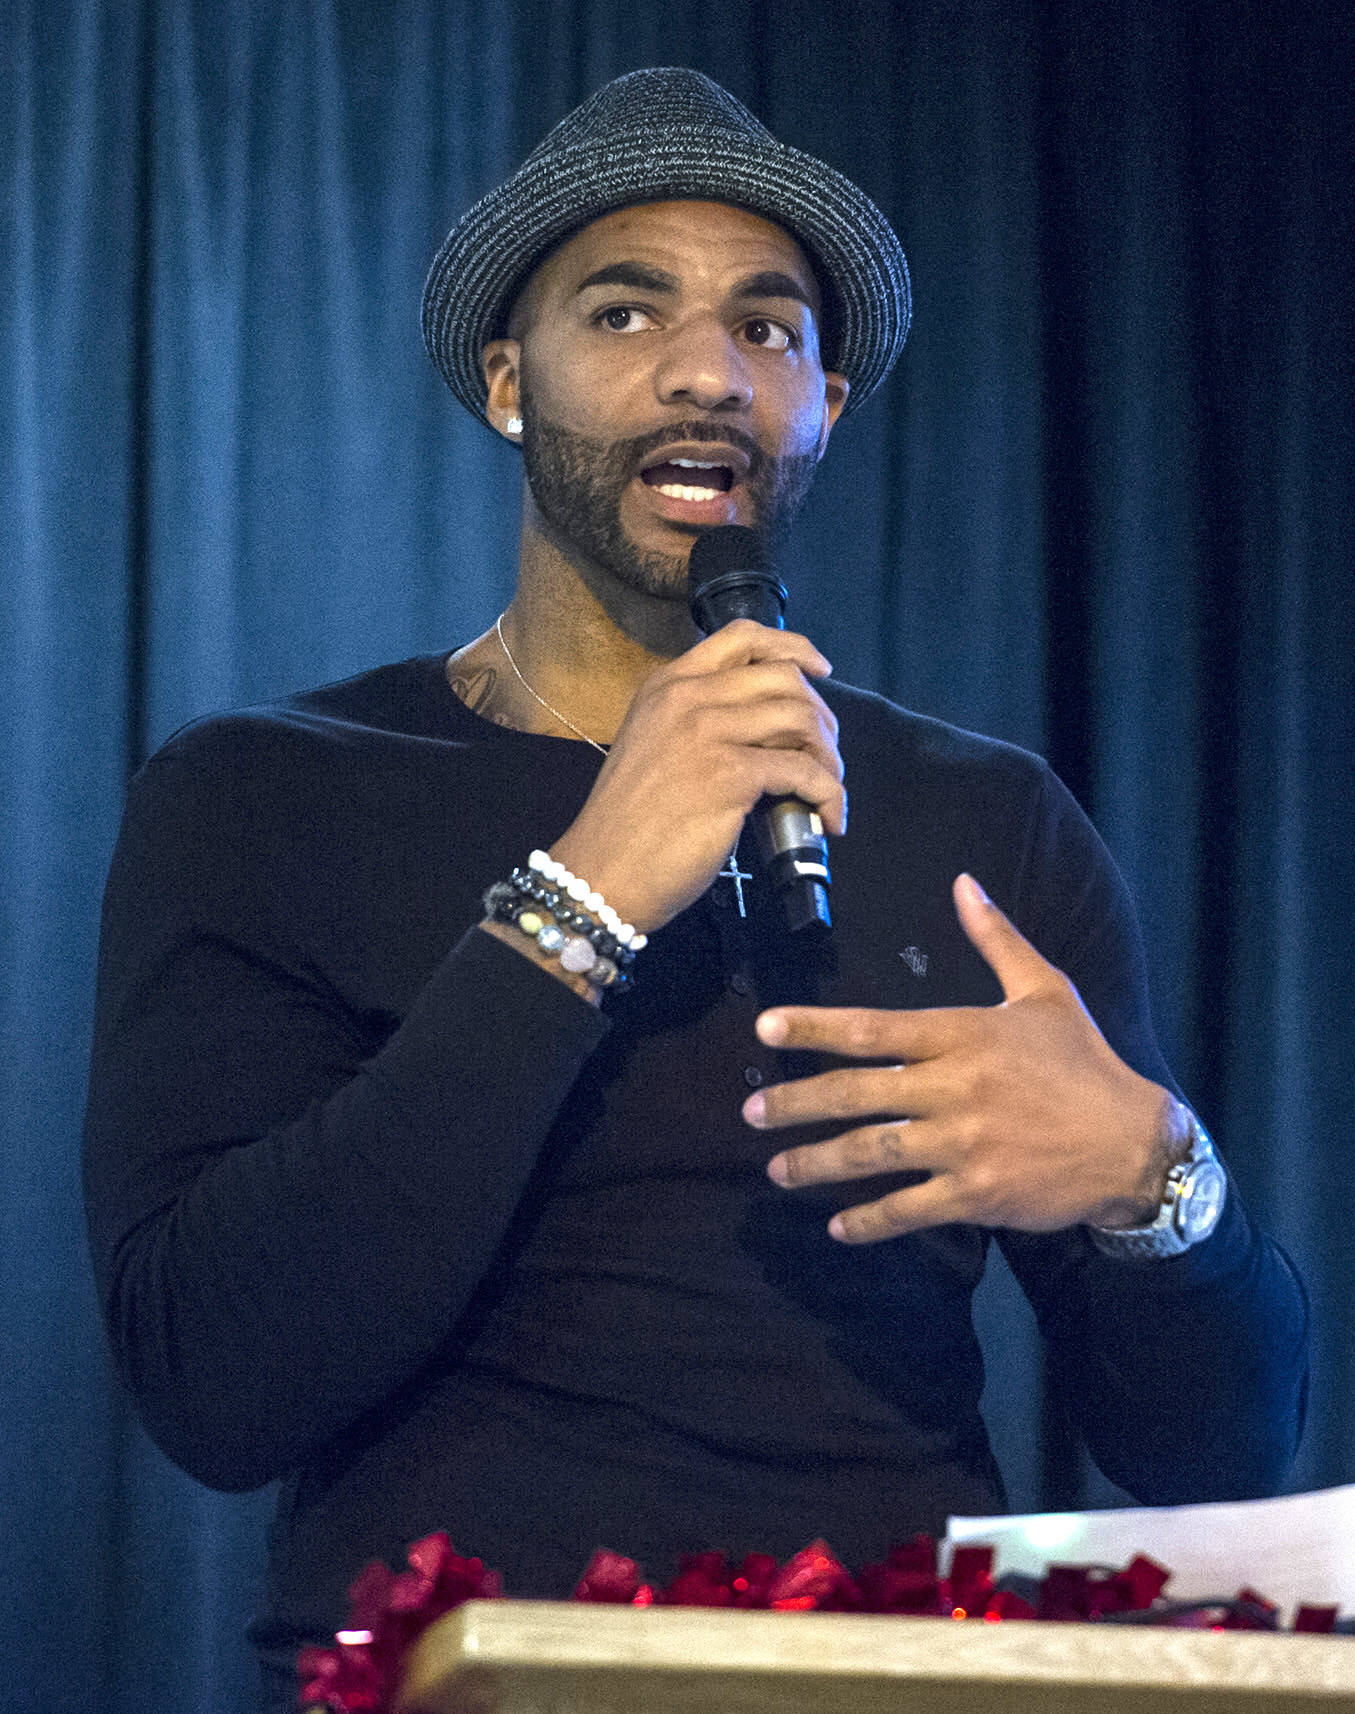 In this file photo from May 2016, NBA player and former Juneau-Douglas High School star Carlos Boozer makes a surprise visit during the JDHS Basketball Awards Banquet at the Elizabeth Peratrovich Hall. Boozer returned to help celebrate the team’s first state championship since he helped JDHS win one 18 years ago. (Michael Penn | Juneau Empire File)